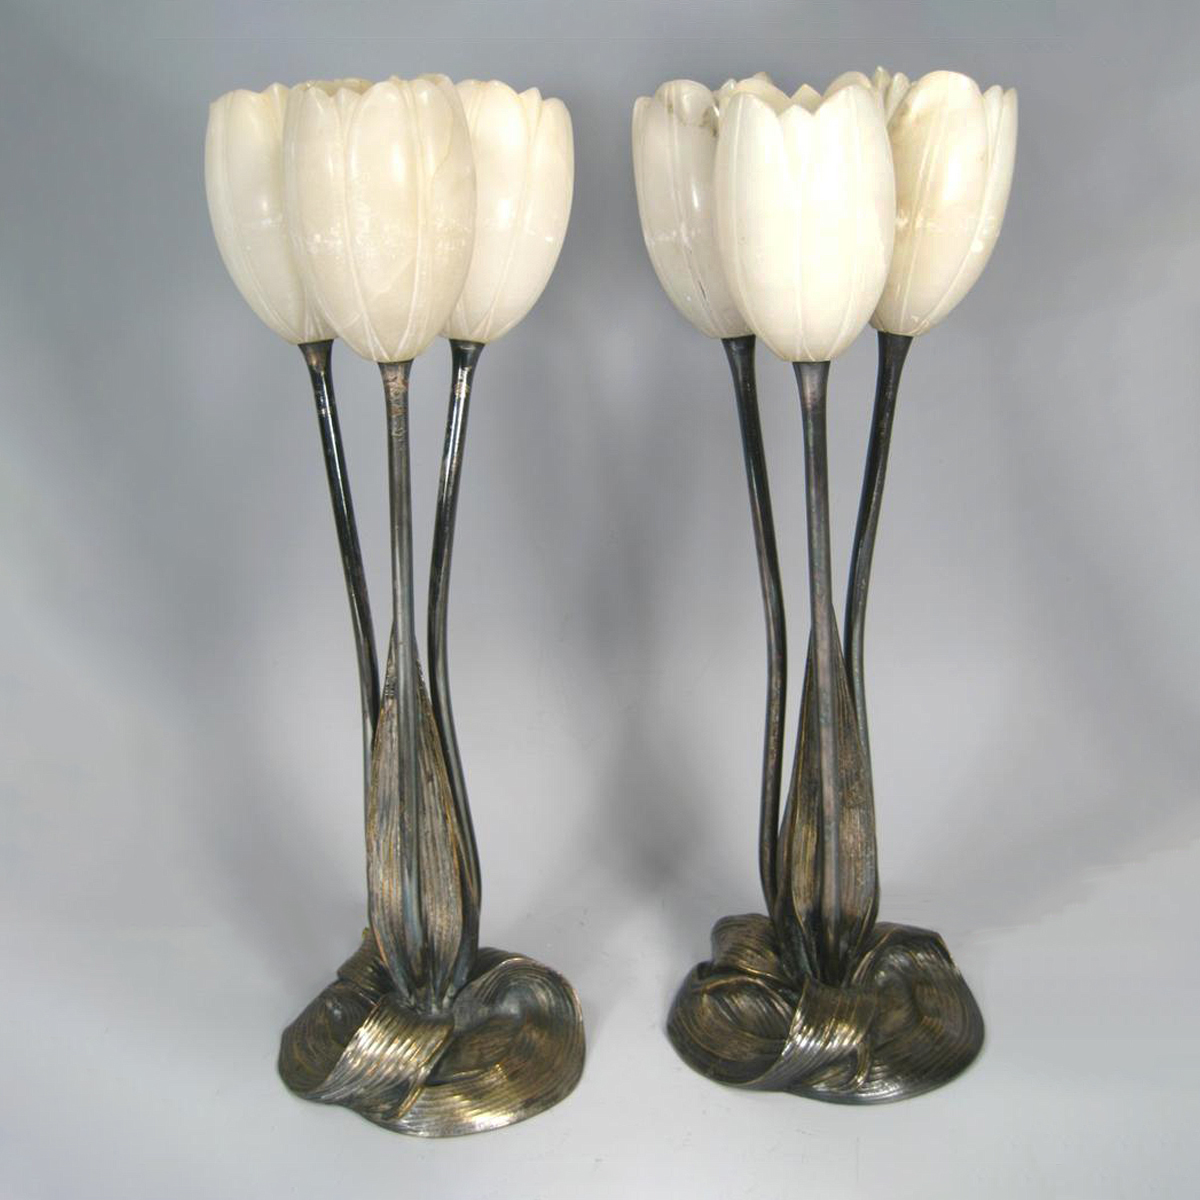 Pair of Art Nouveau/Art Deco silvered bronze and alabaster tulip form table lamps